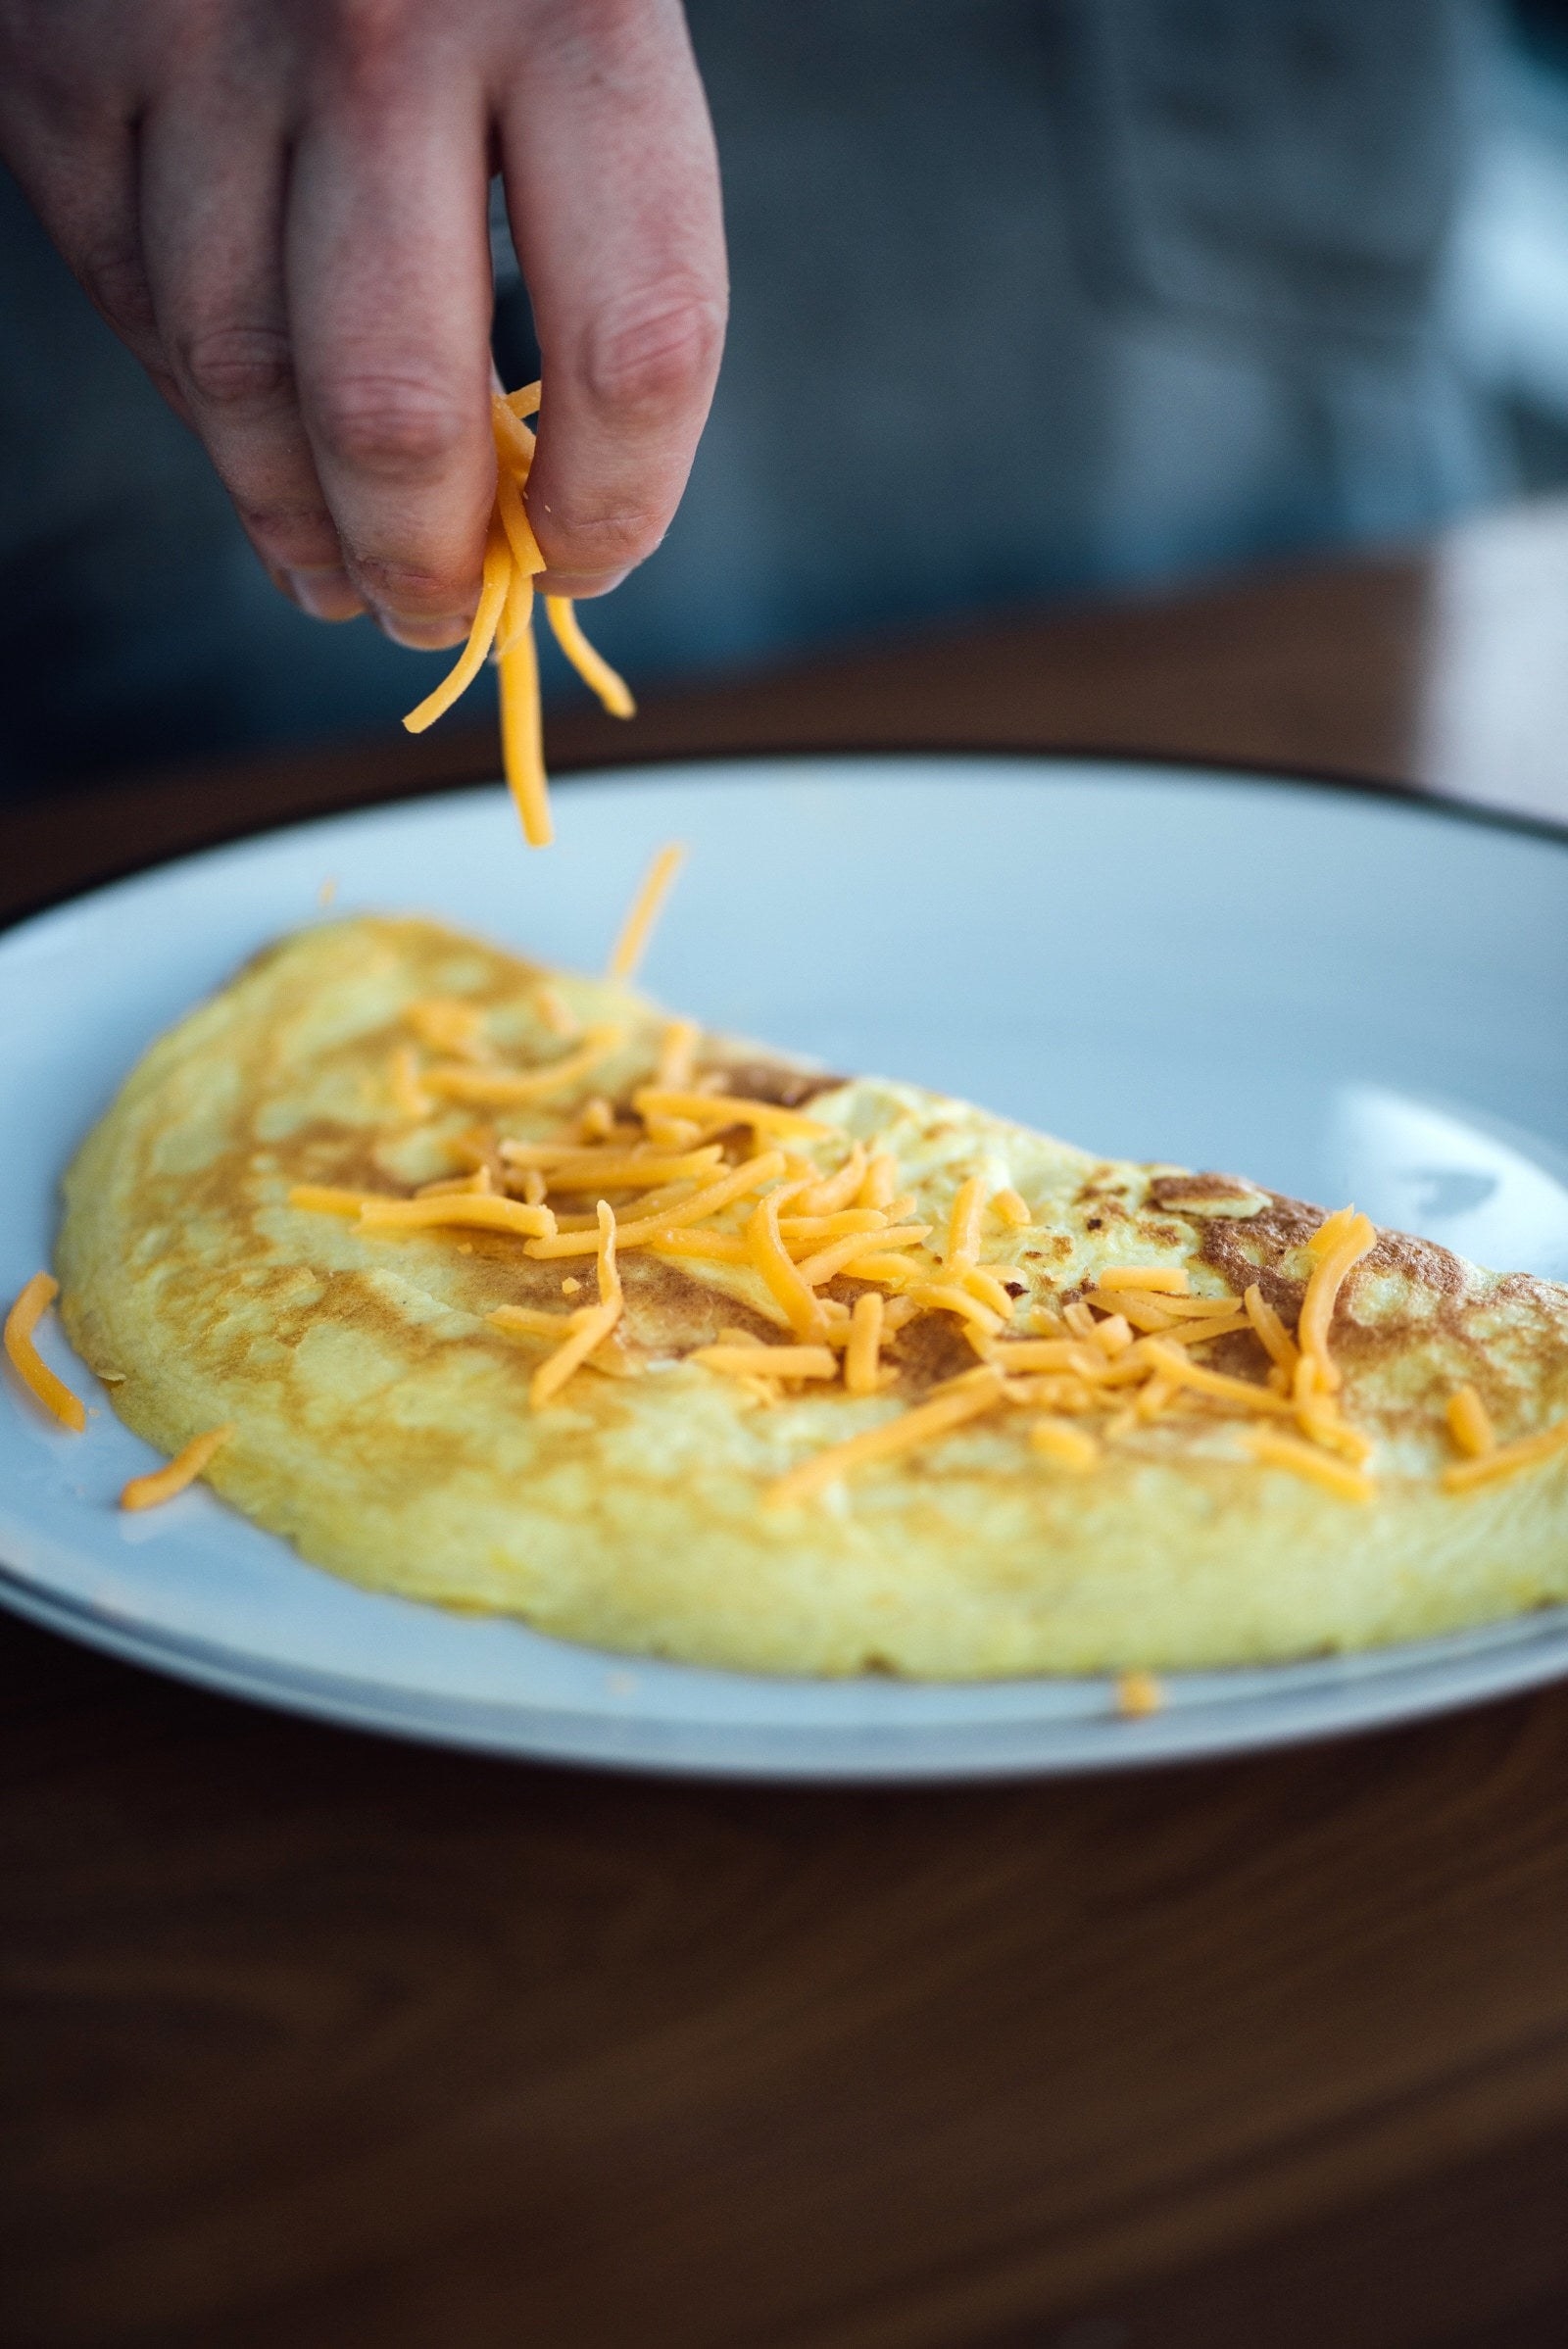 Preparing an omelet with cheese.